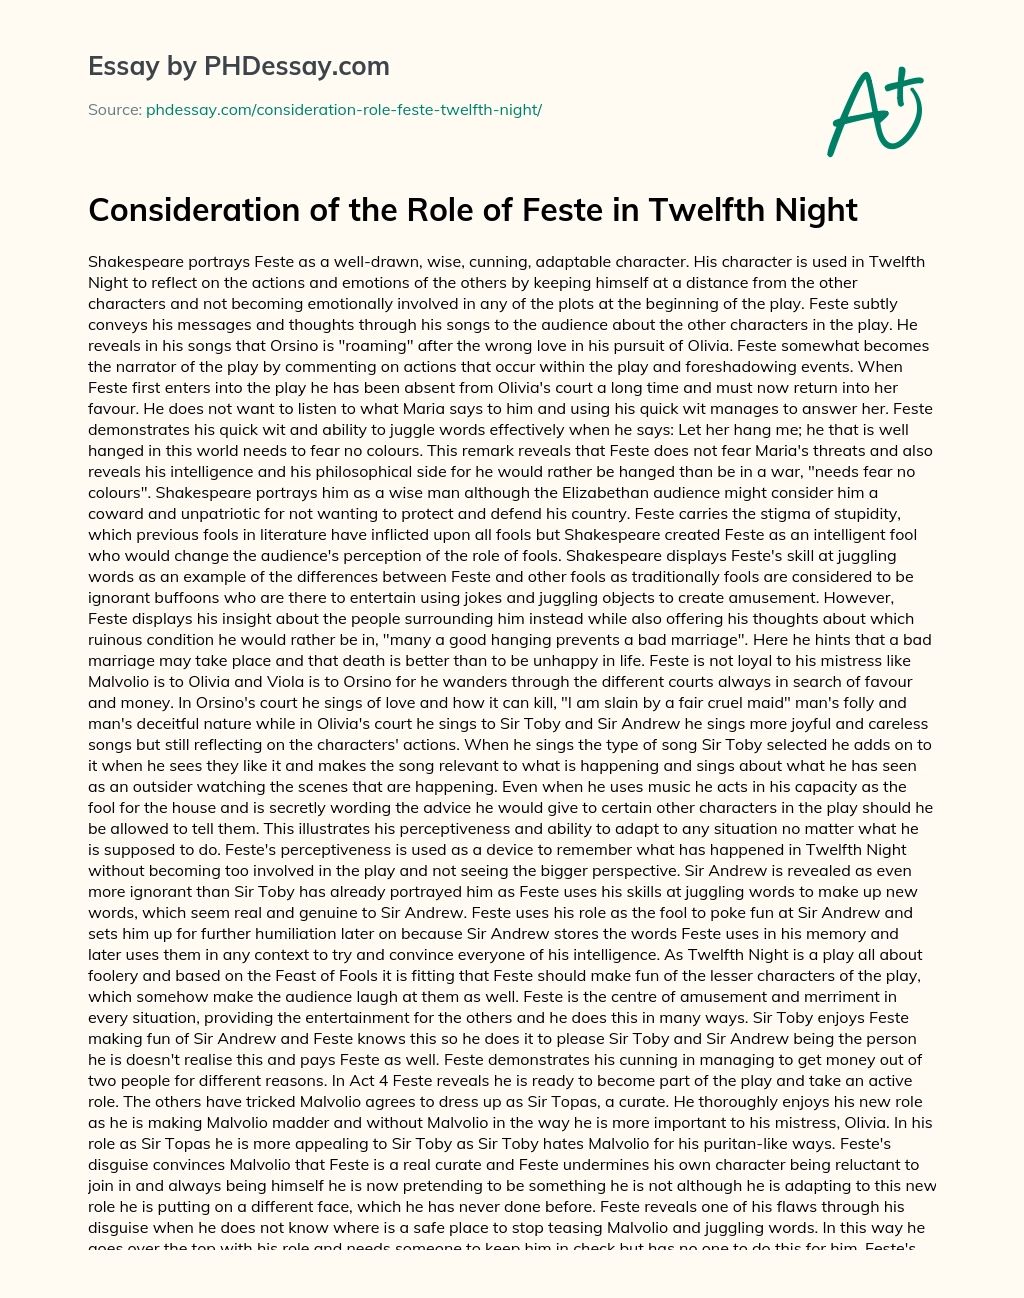 why is feste significant to twelfth night